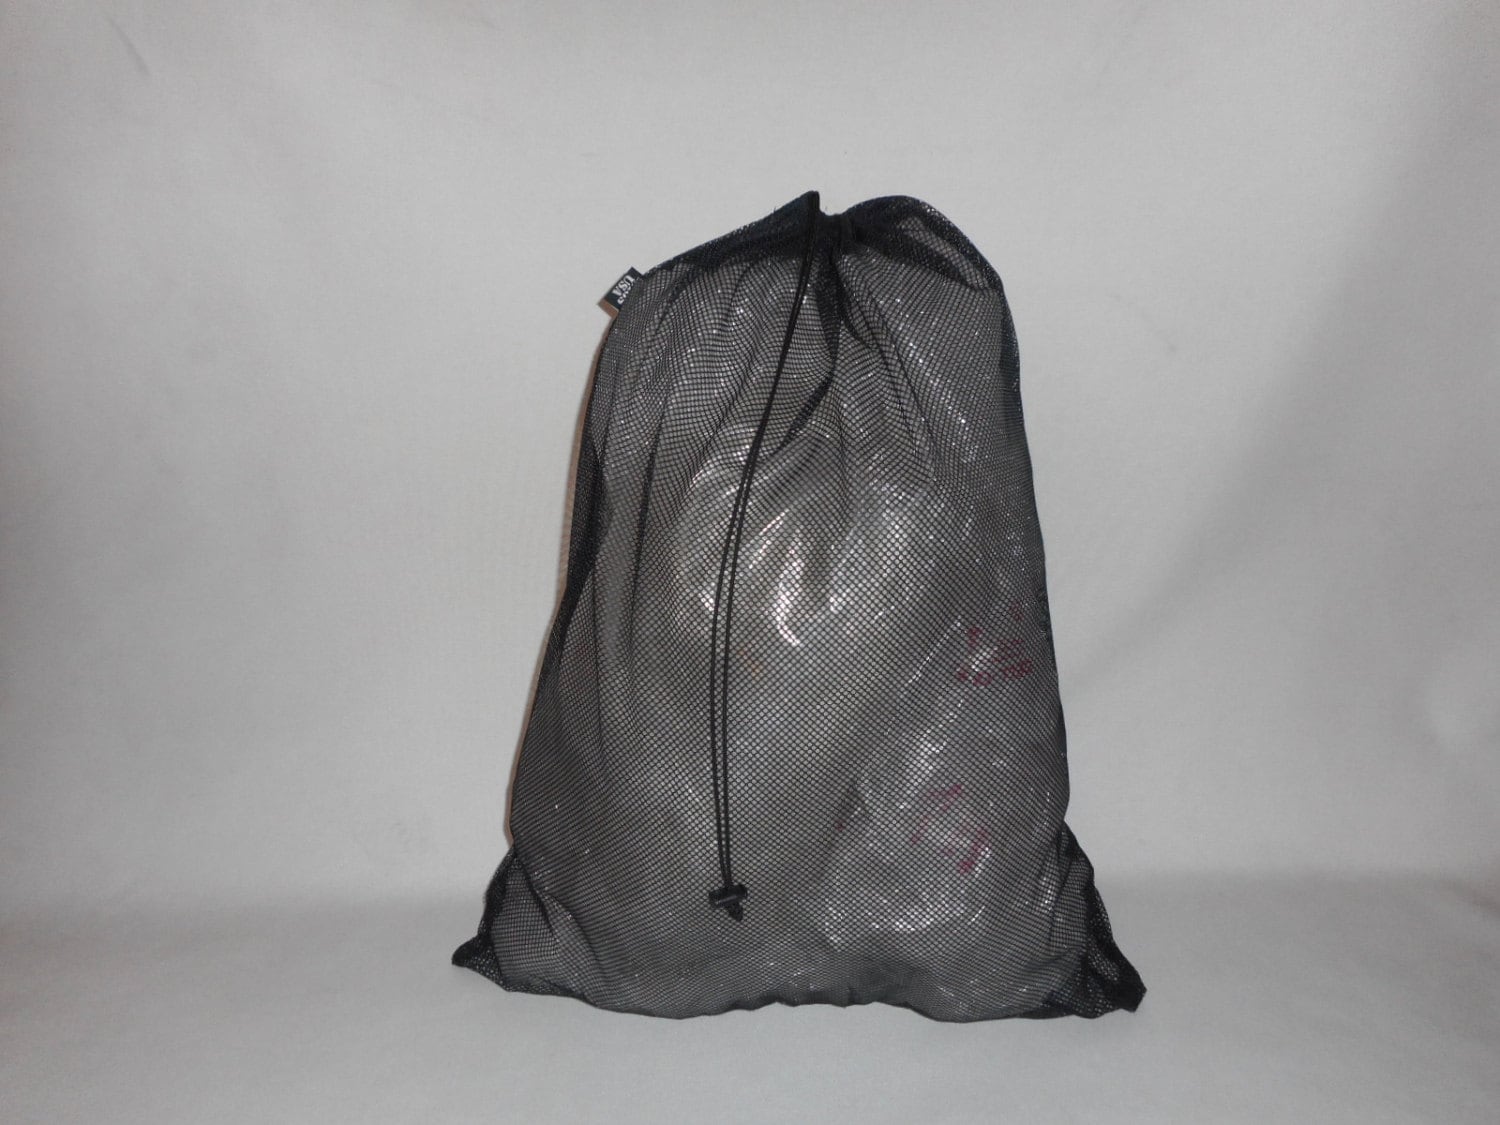 drawstring with cord lock,Made in USA. Laundry bag industrial mesh,strong 